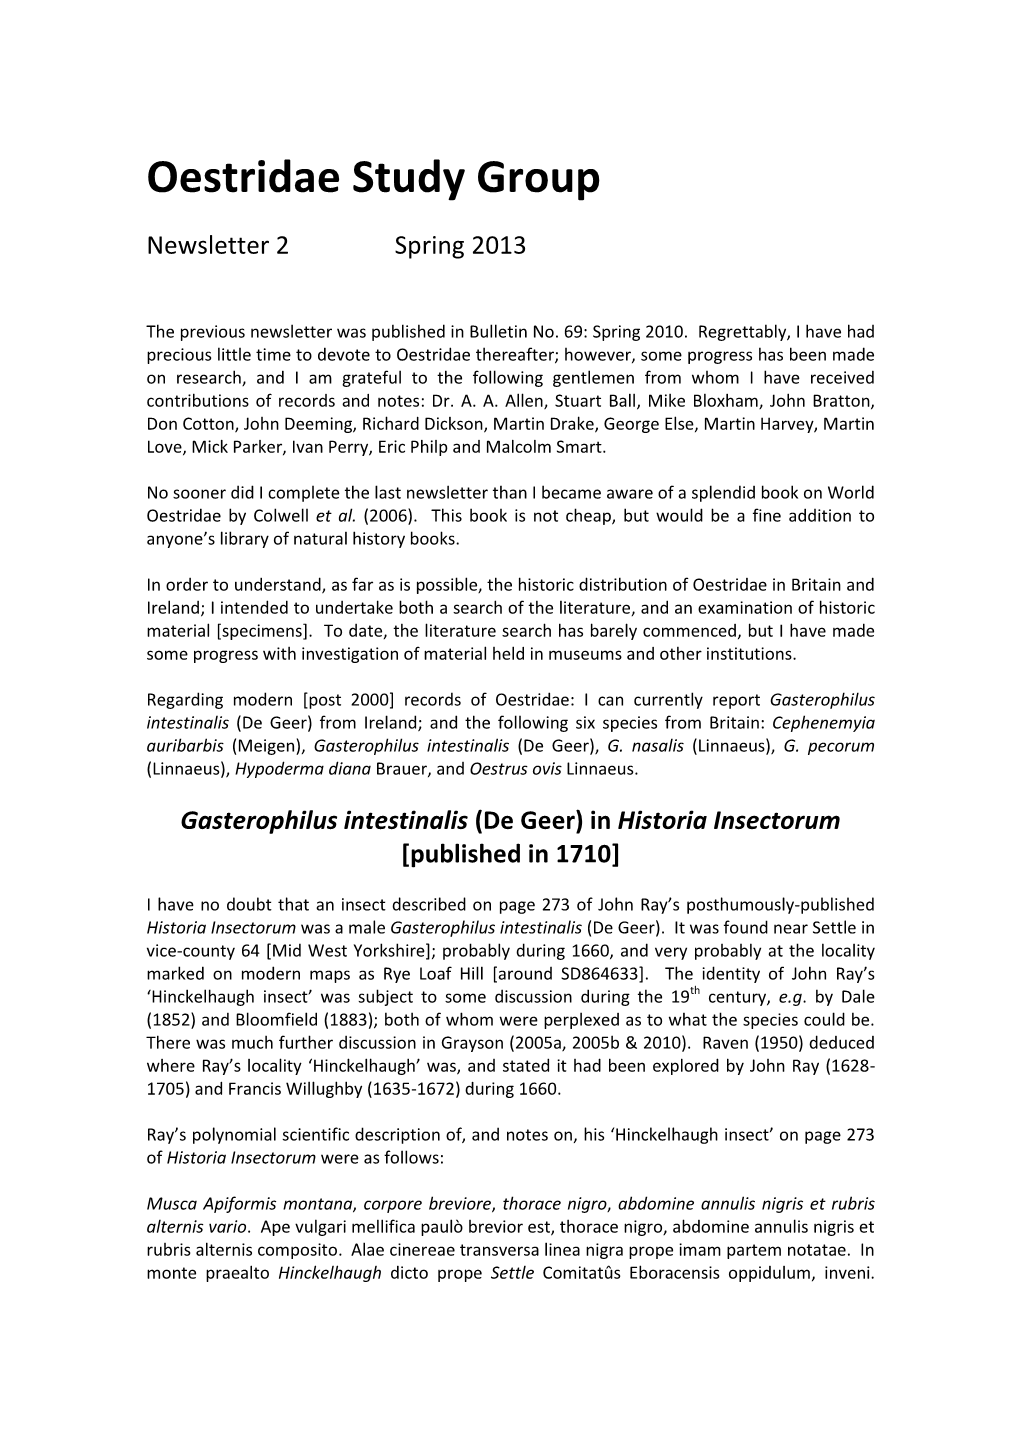 Oestridae Study Group Newsletter 2